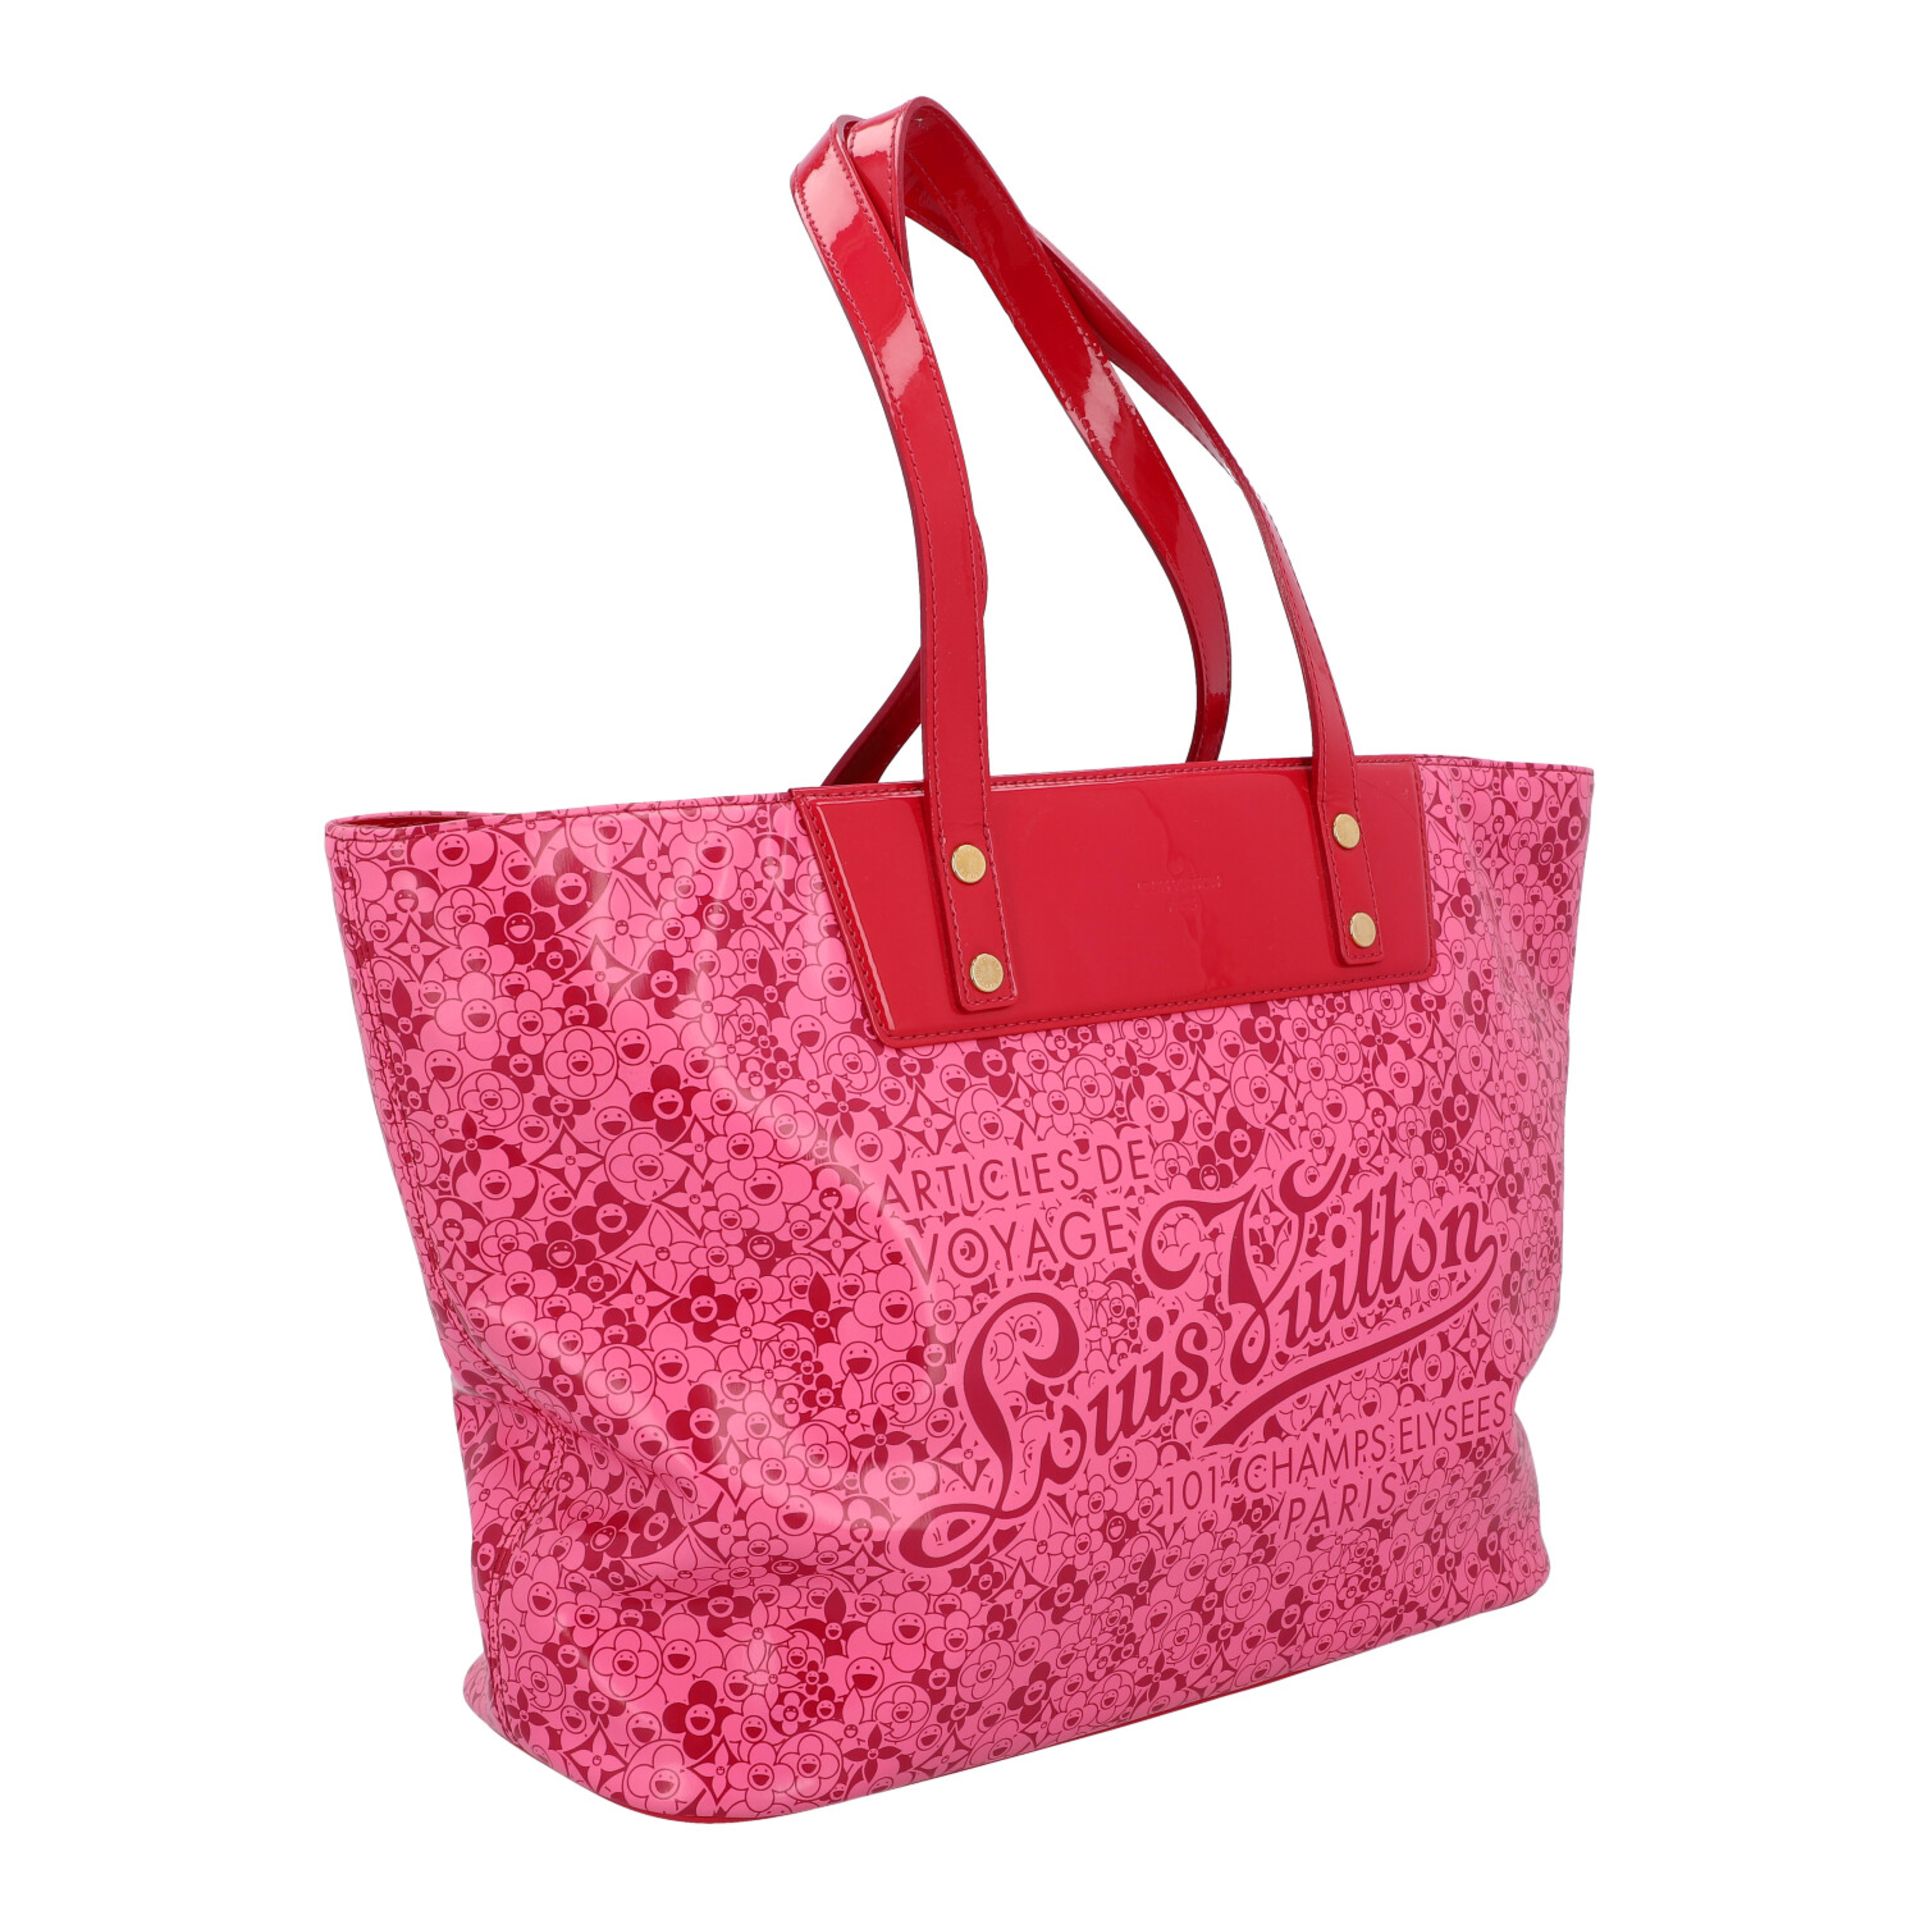 LOUIS VUITTON Shopper "COSMIC BLOSSOM TOTE". - Image 2 of 8